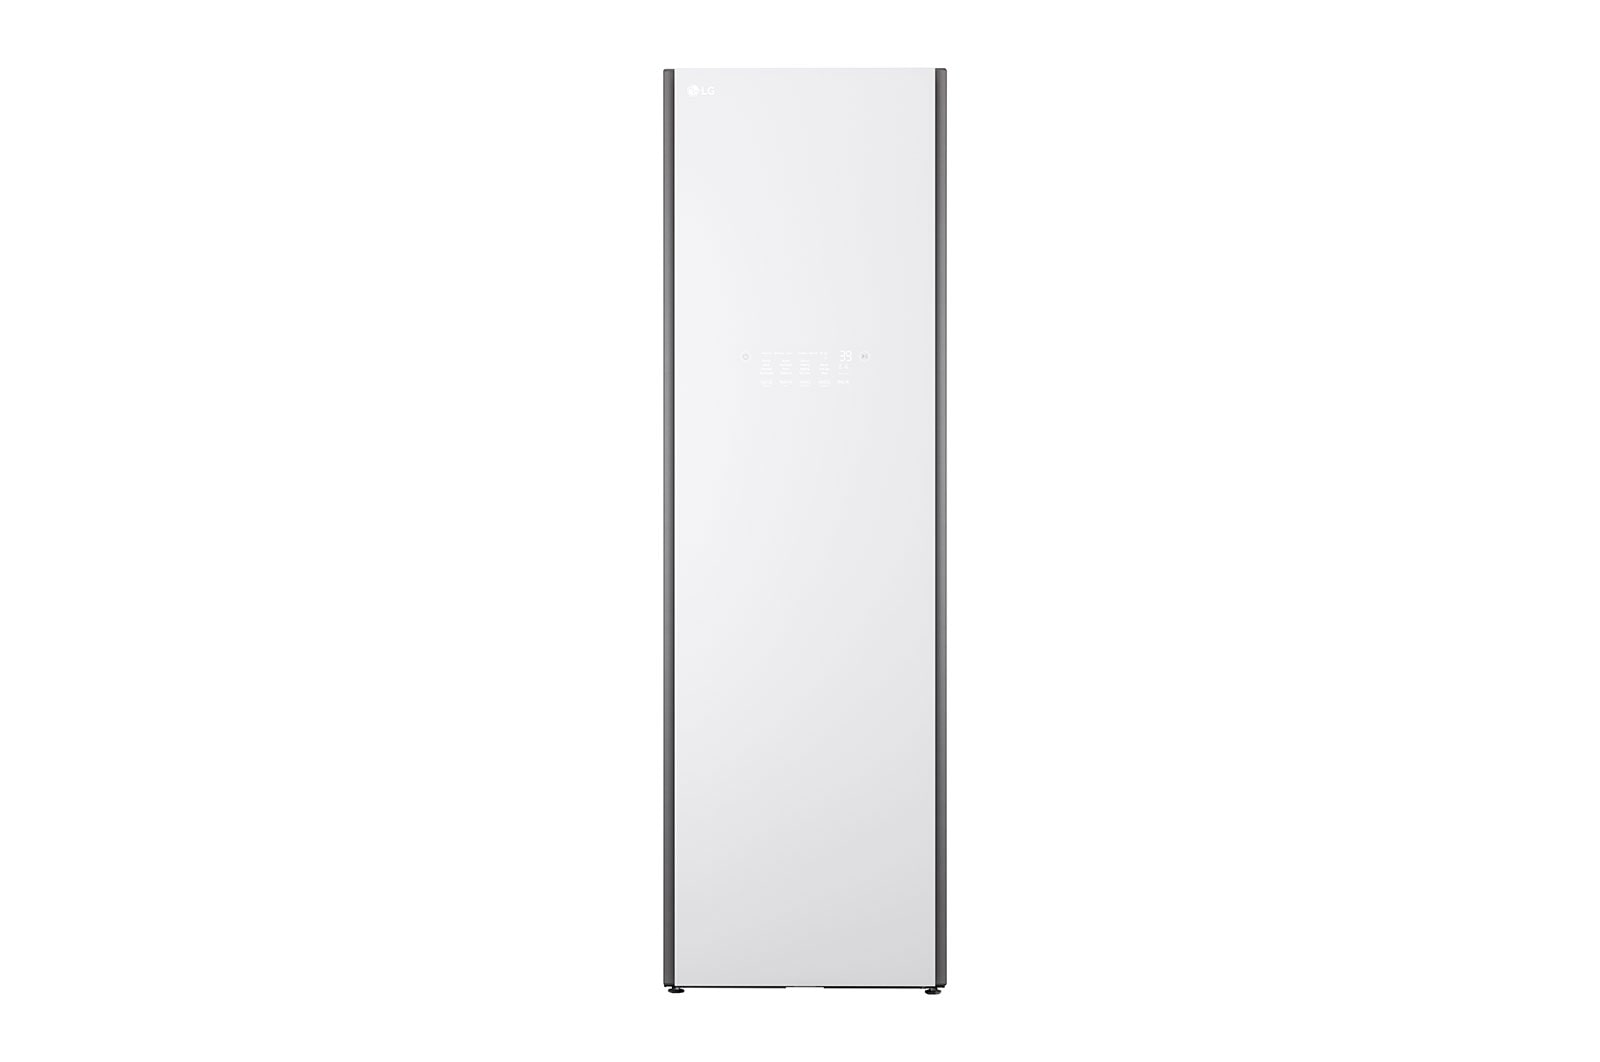 LG Styler(R) Smart wi-fi Enabled Steam Closet with TrueSteam(R) Technology  and Exclusive Moving Hangers - S3WFBN